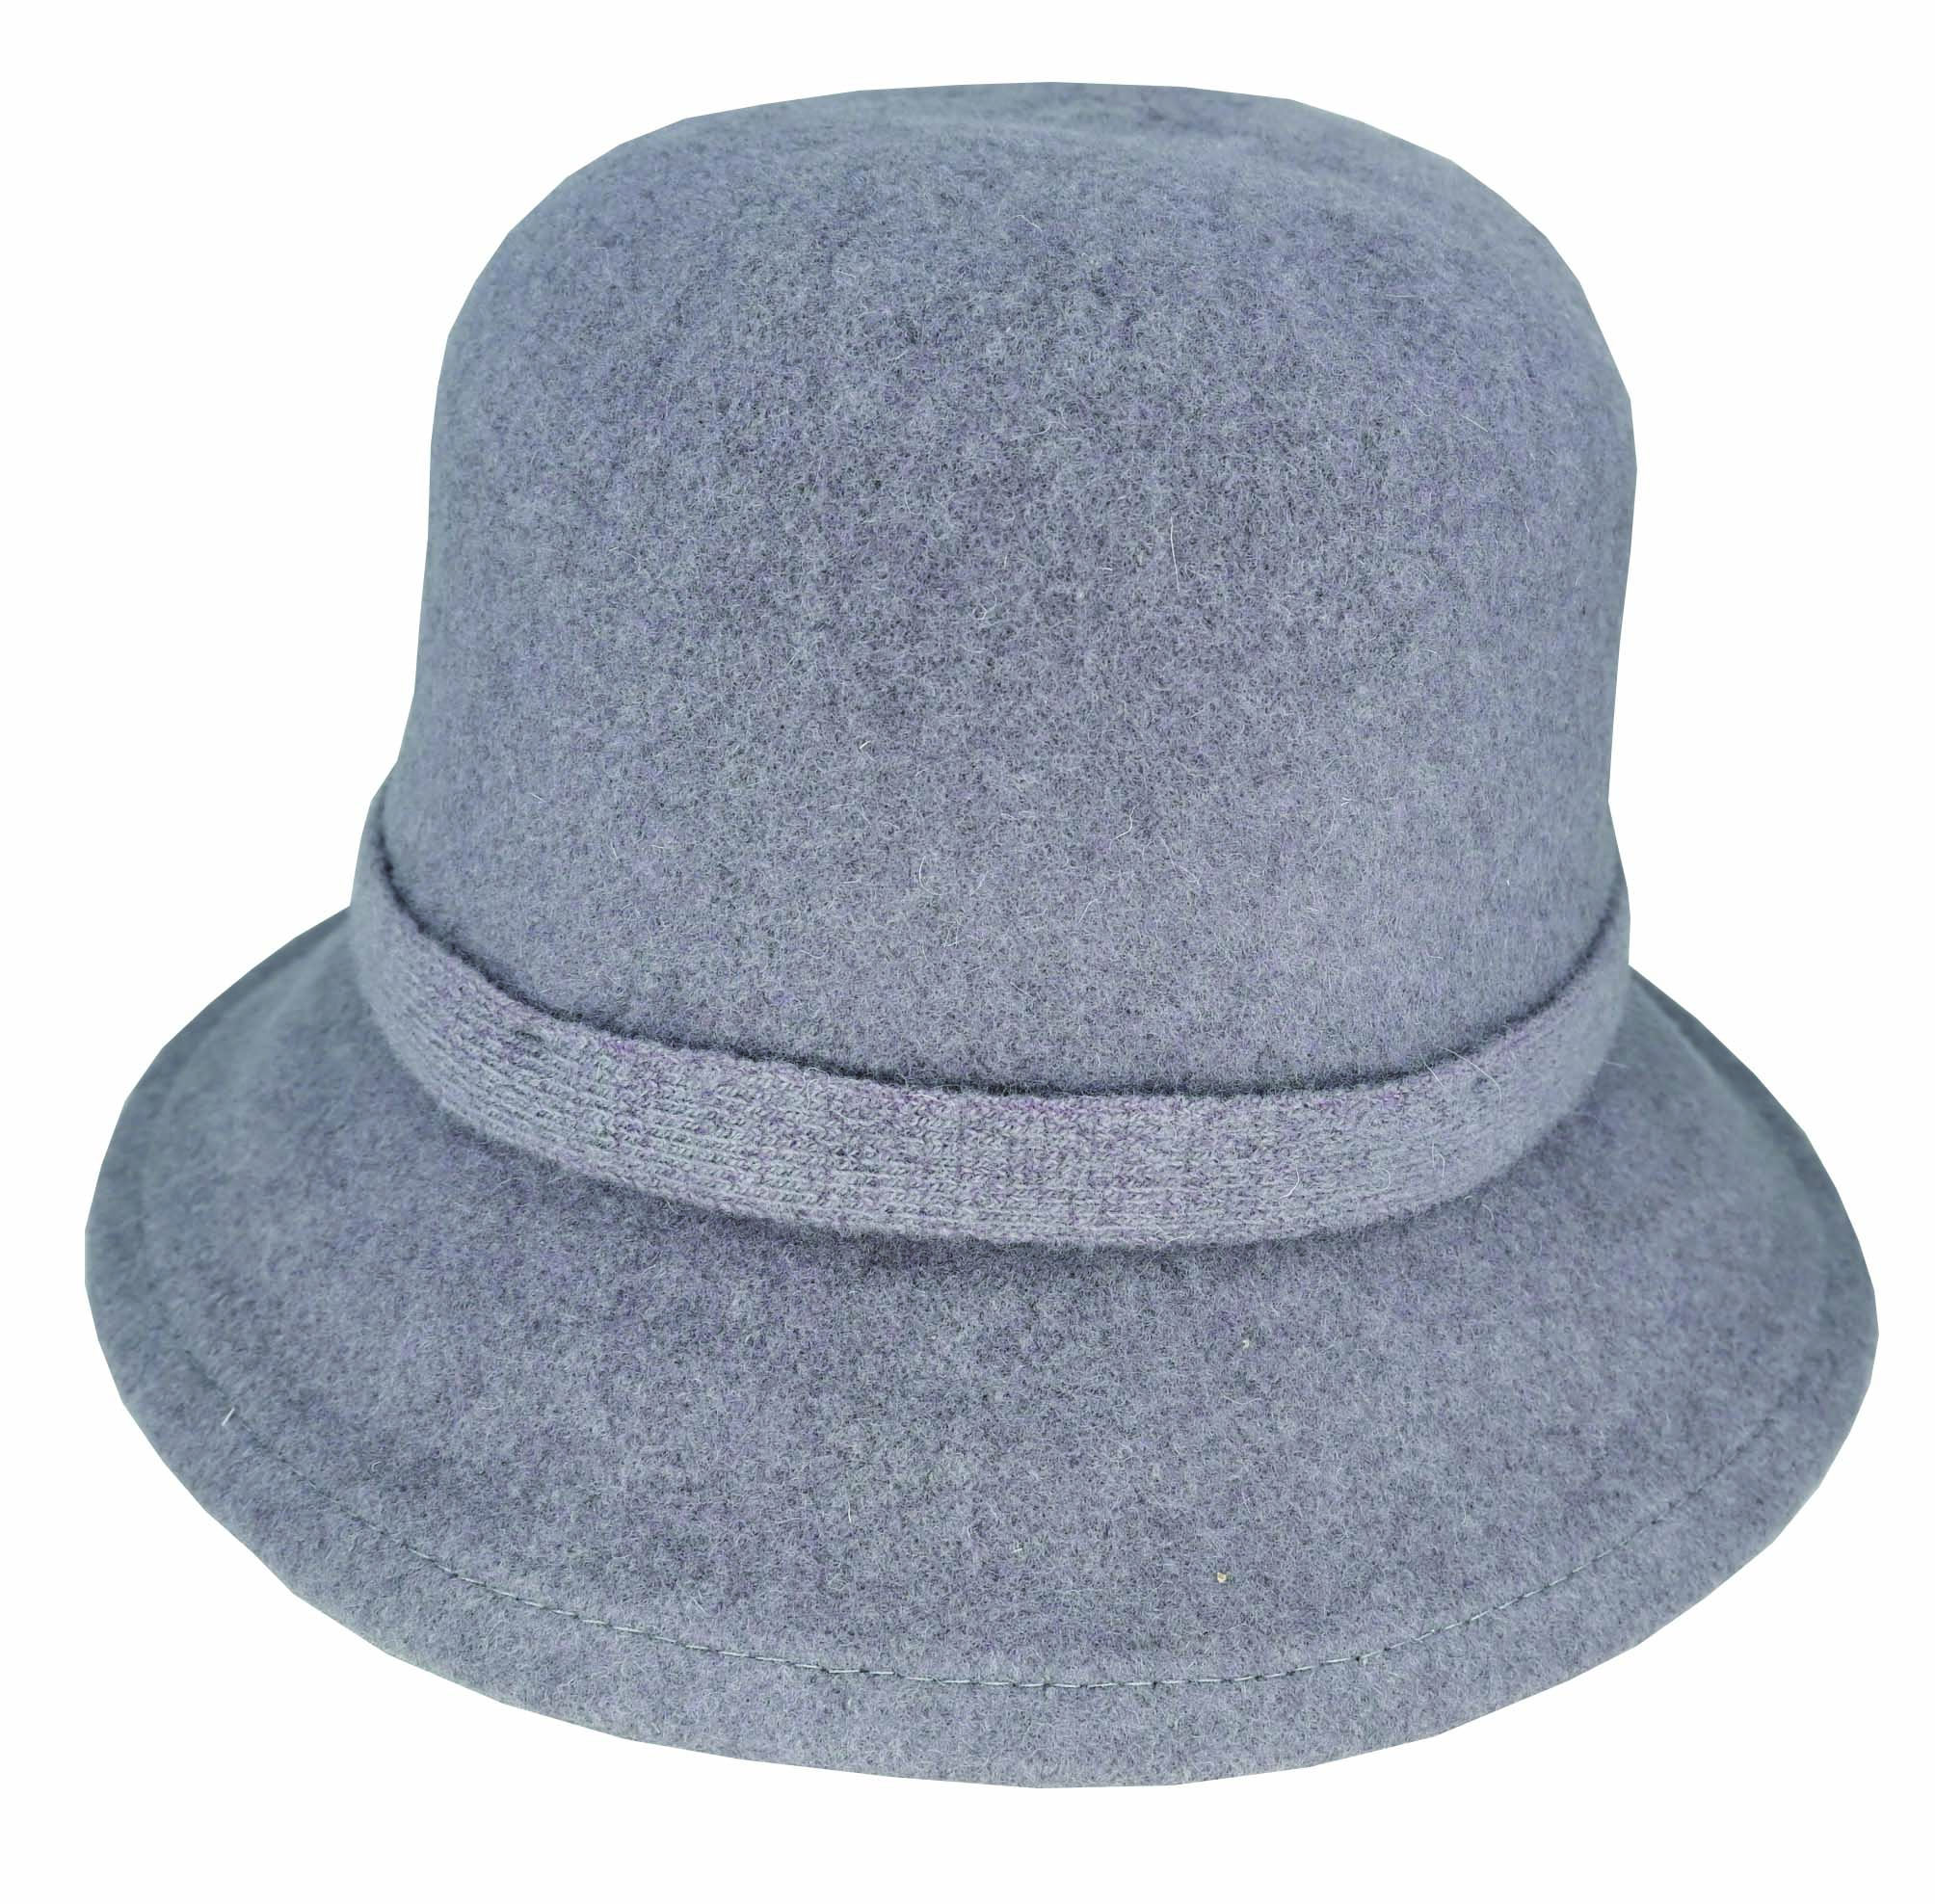 BOILED WOOL CLOCHE W/ BOW - PACK 12